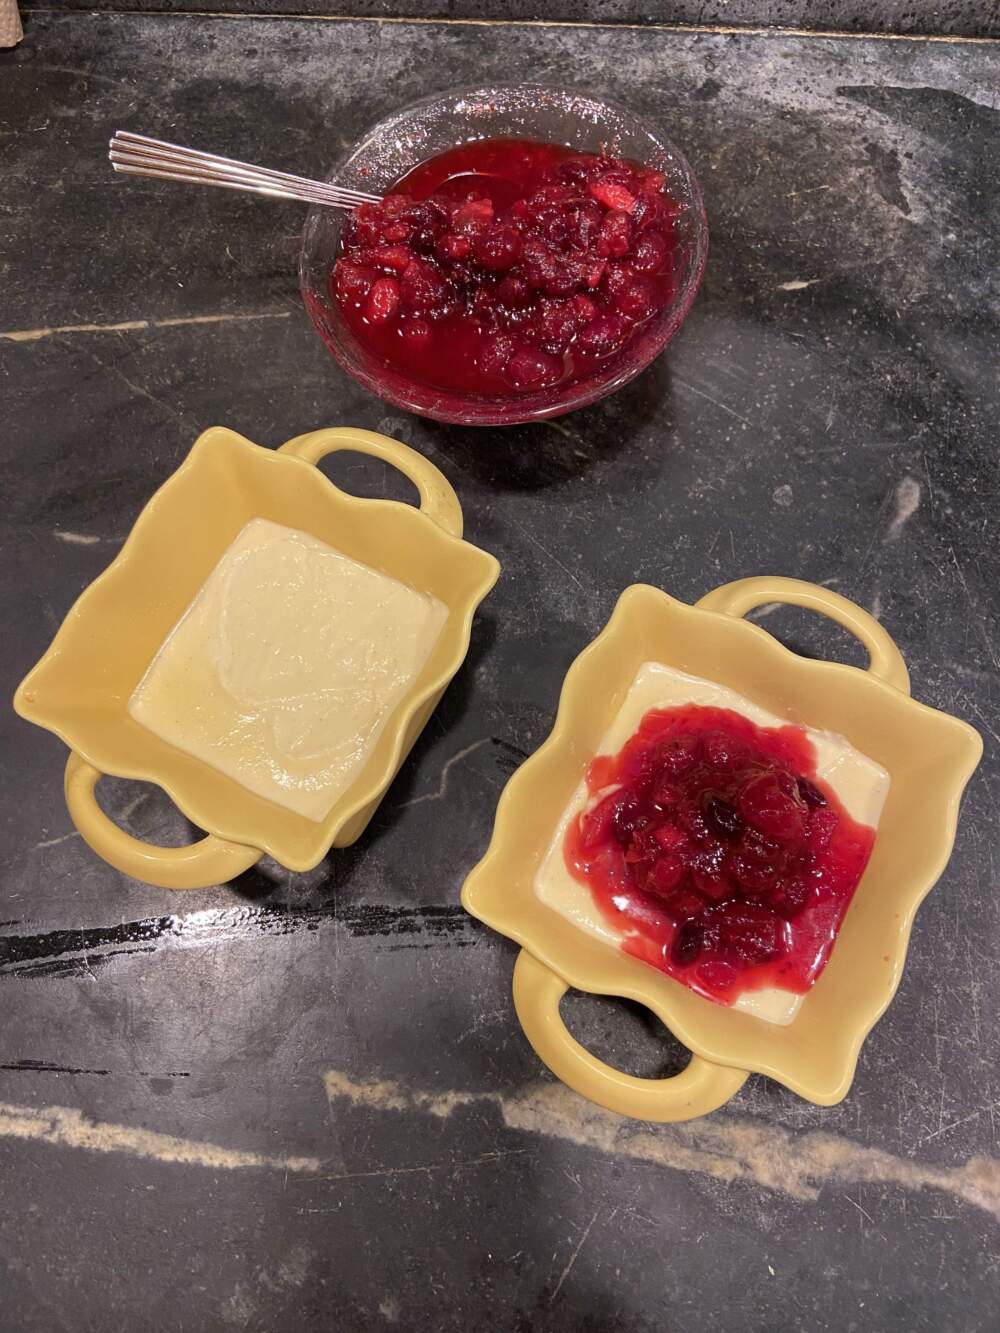 Vanilla pudding with cranberry sauce. (Kathy Gunst/Here & Now)